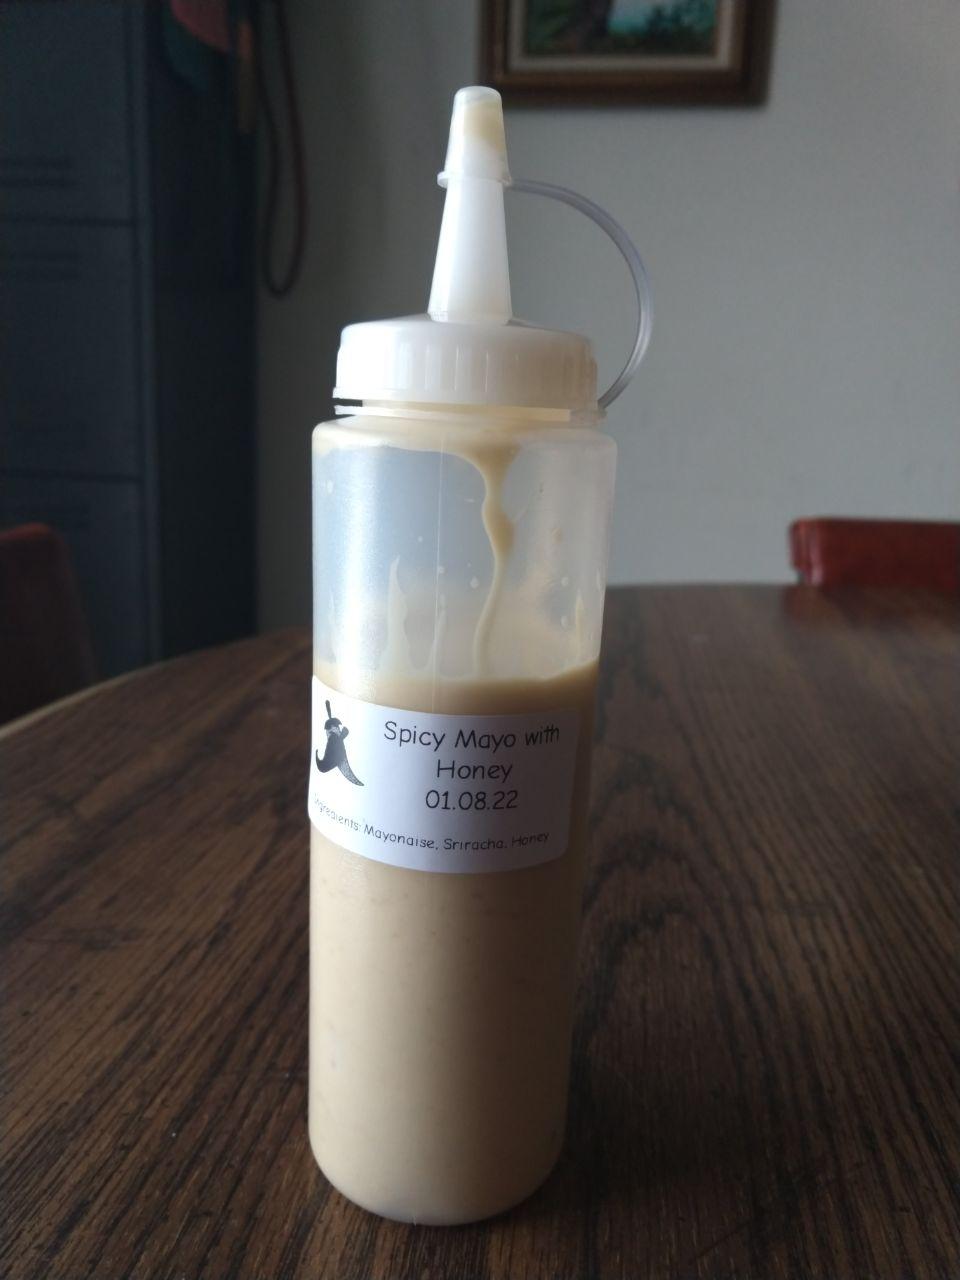 Bottle of spicy mayo made with homemade sriracha, mayonaise, and honey.